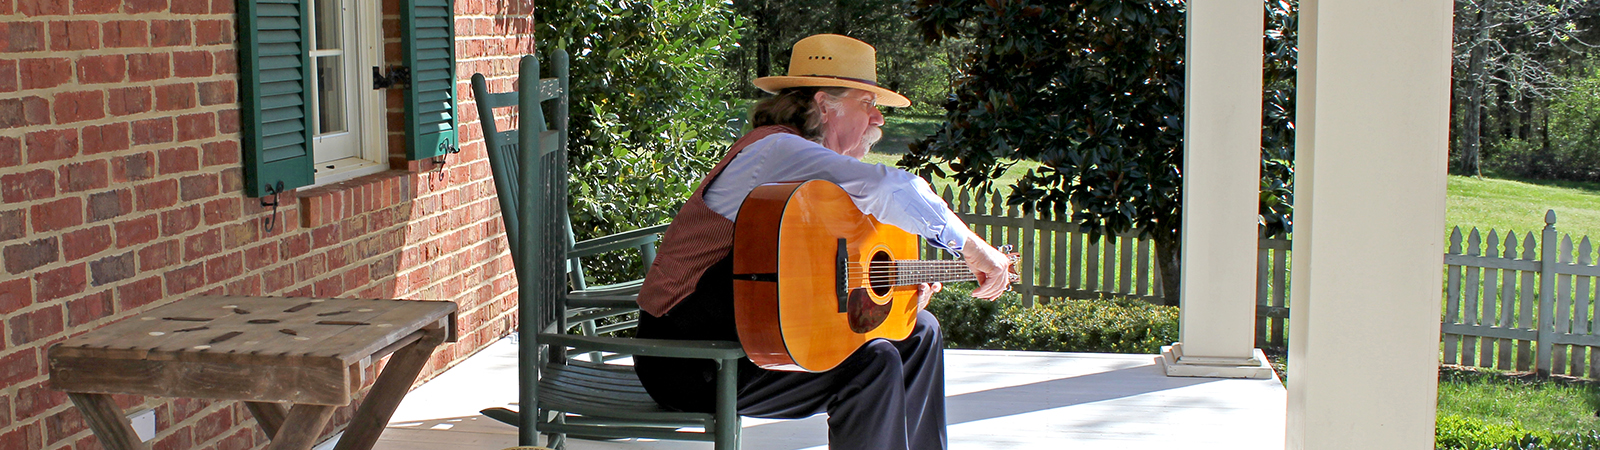 Colonel sitting in rocking chair on front porch playing guitar.